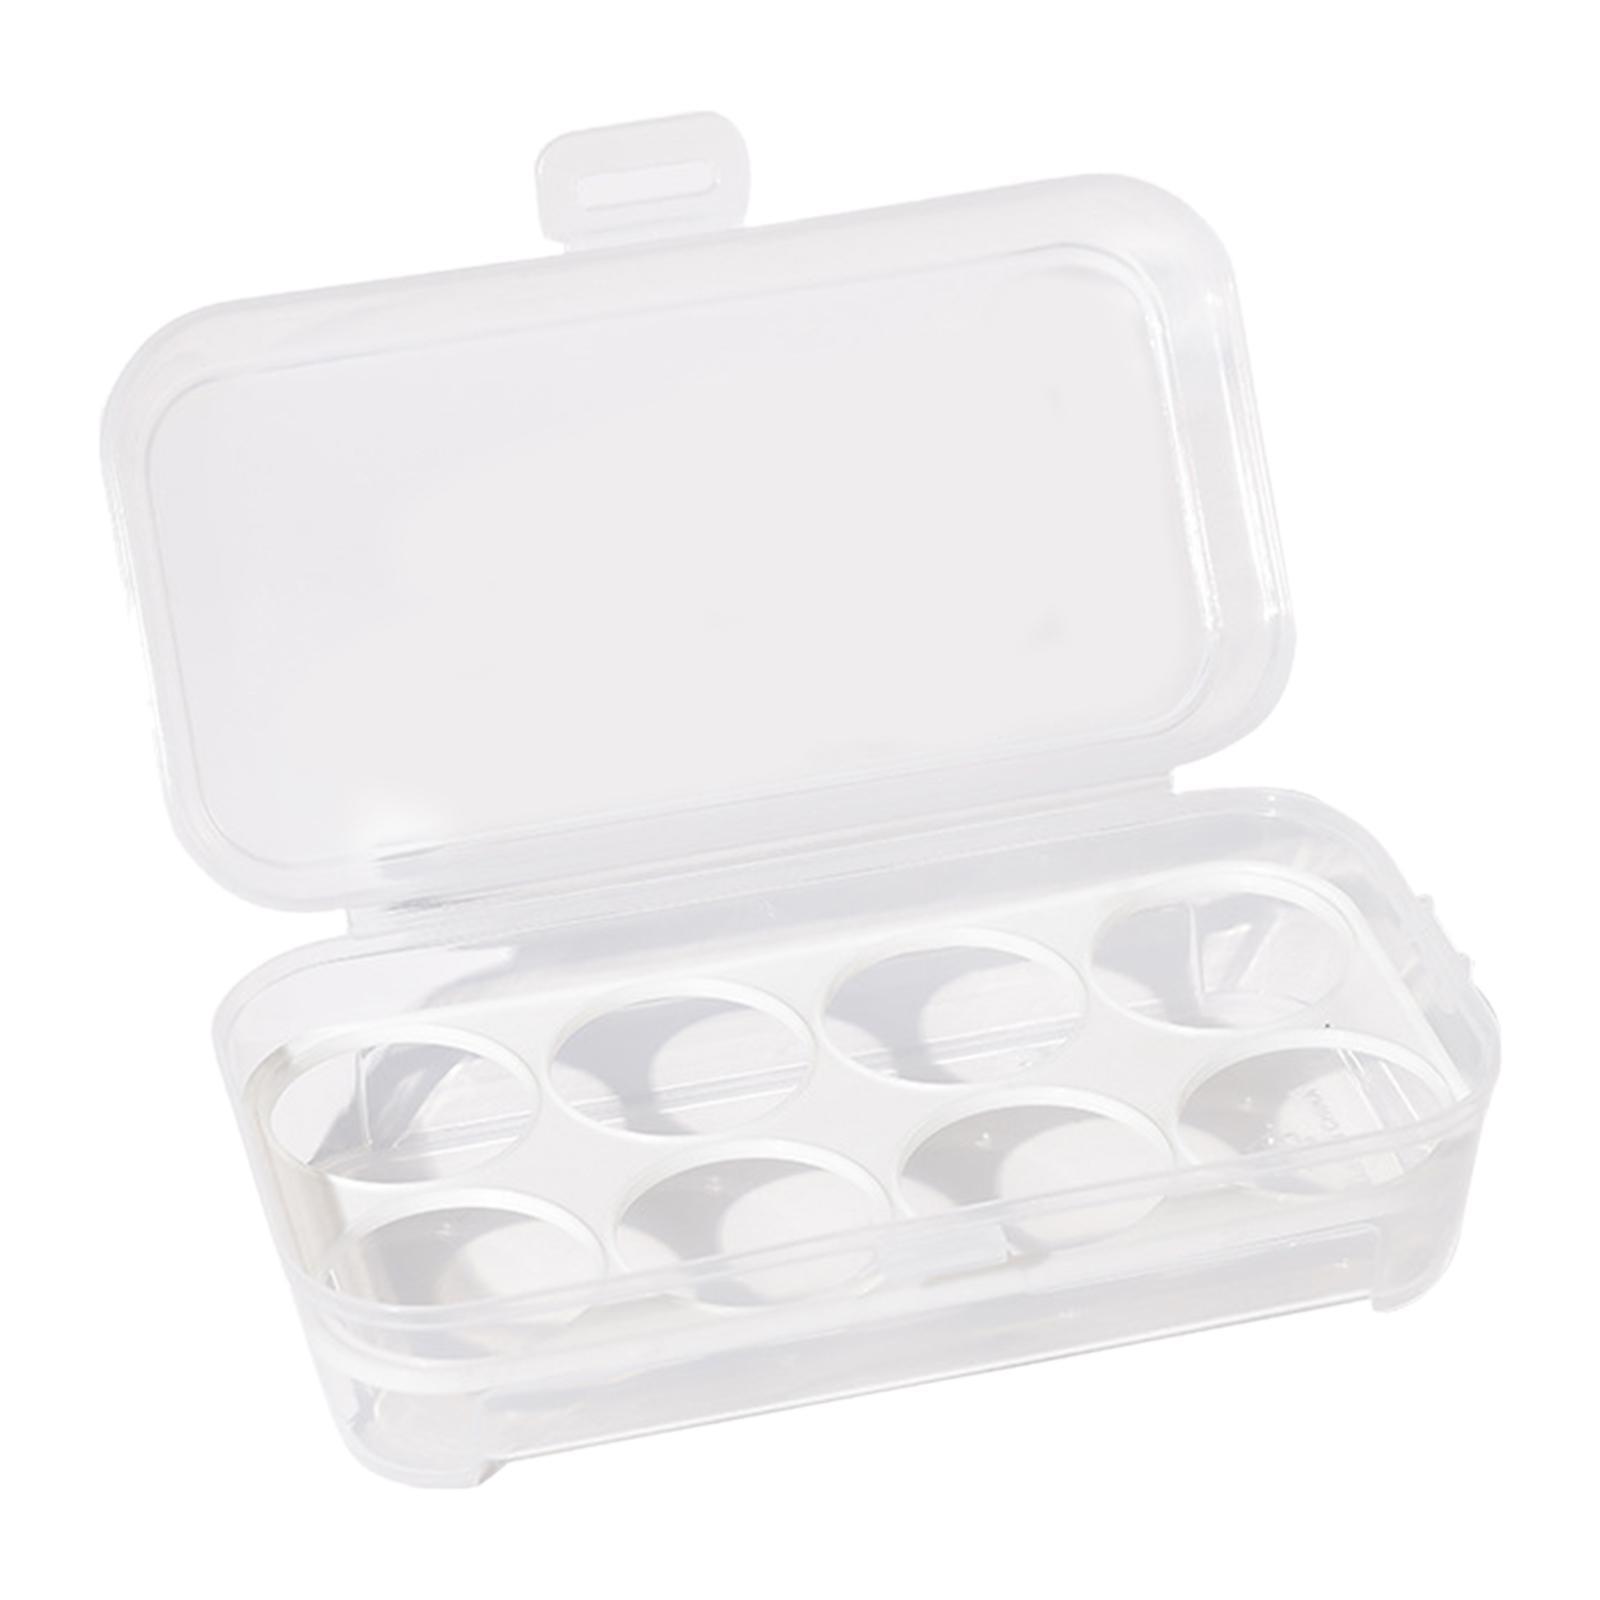 Egg Storage Box Organizer Travel Egg Carrying Case Hiking Egg Container Case